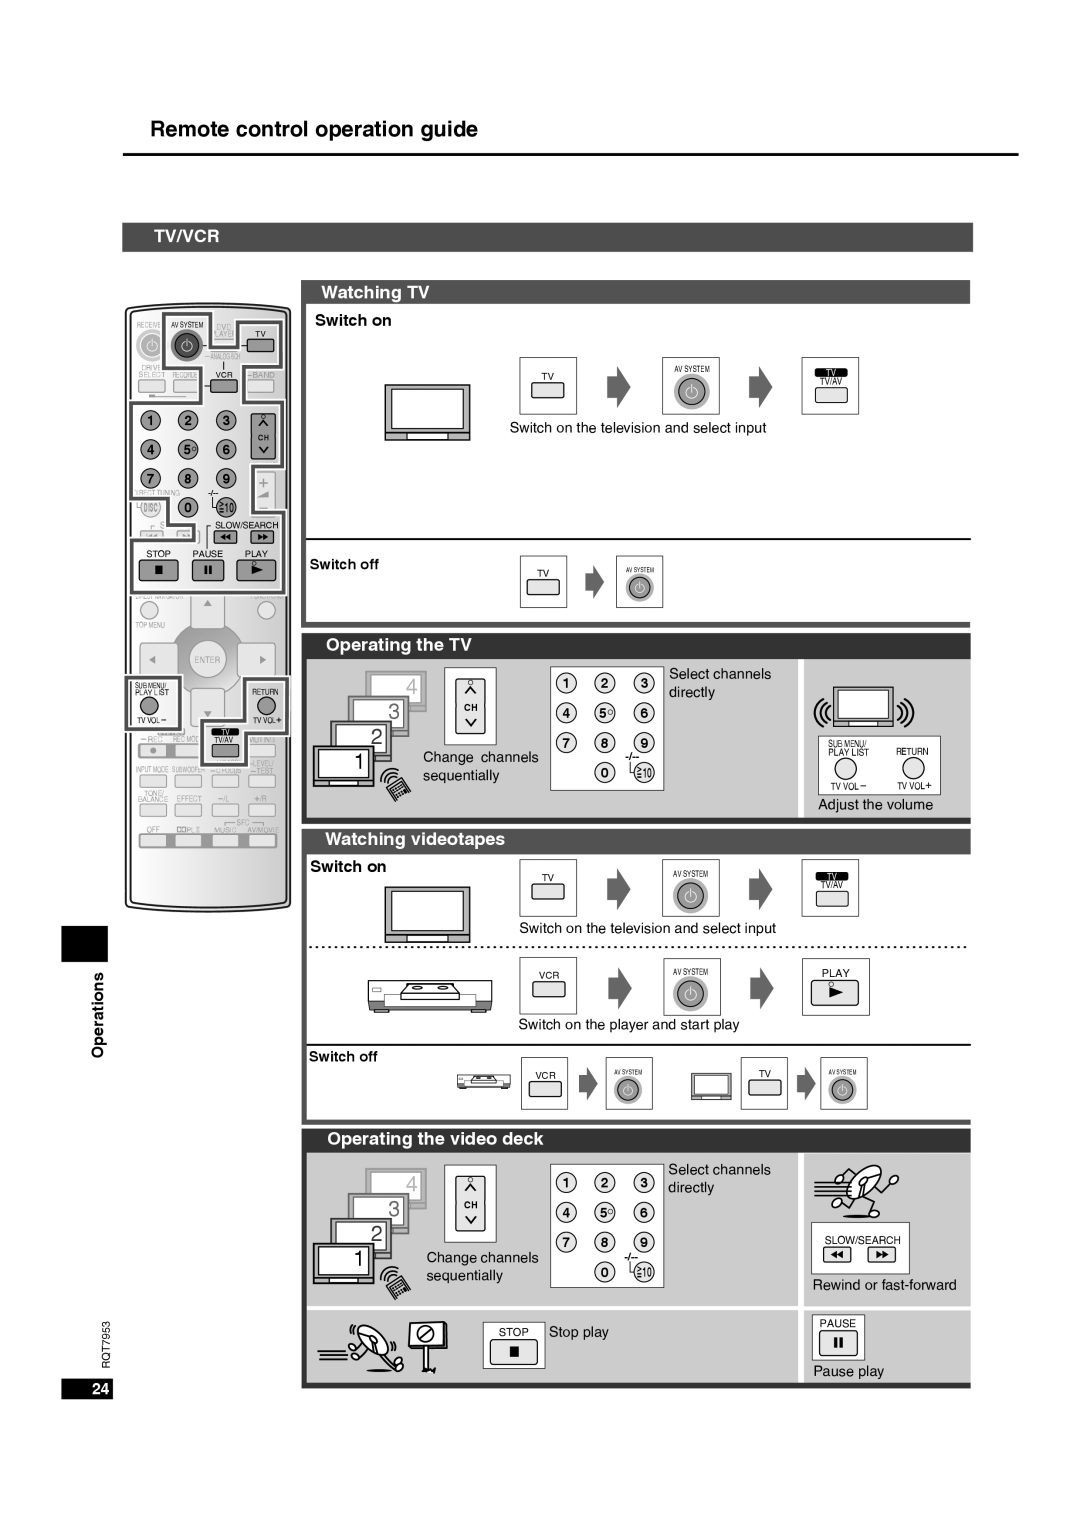 Panasonic SC-HT17 Remote control operation guide, TV/VCR Watching TV, Watching videotapes, Operating the video deck 